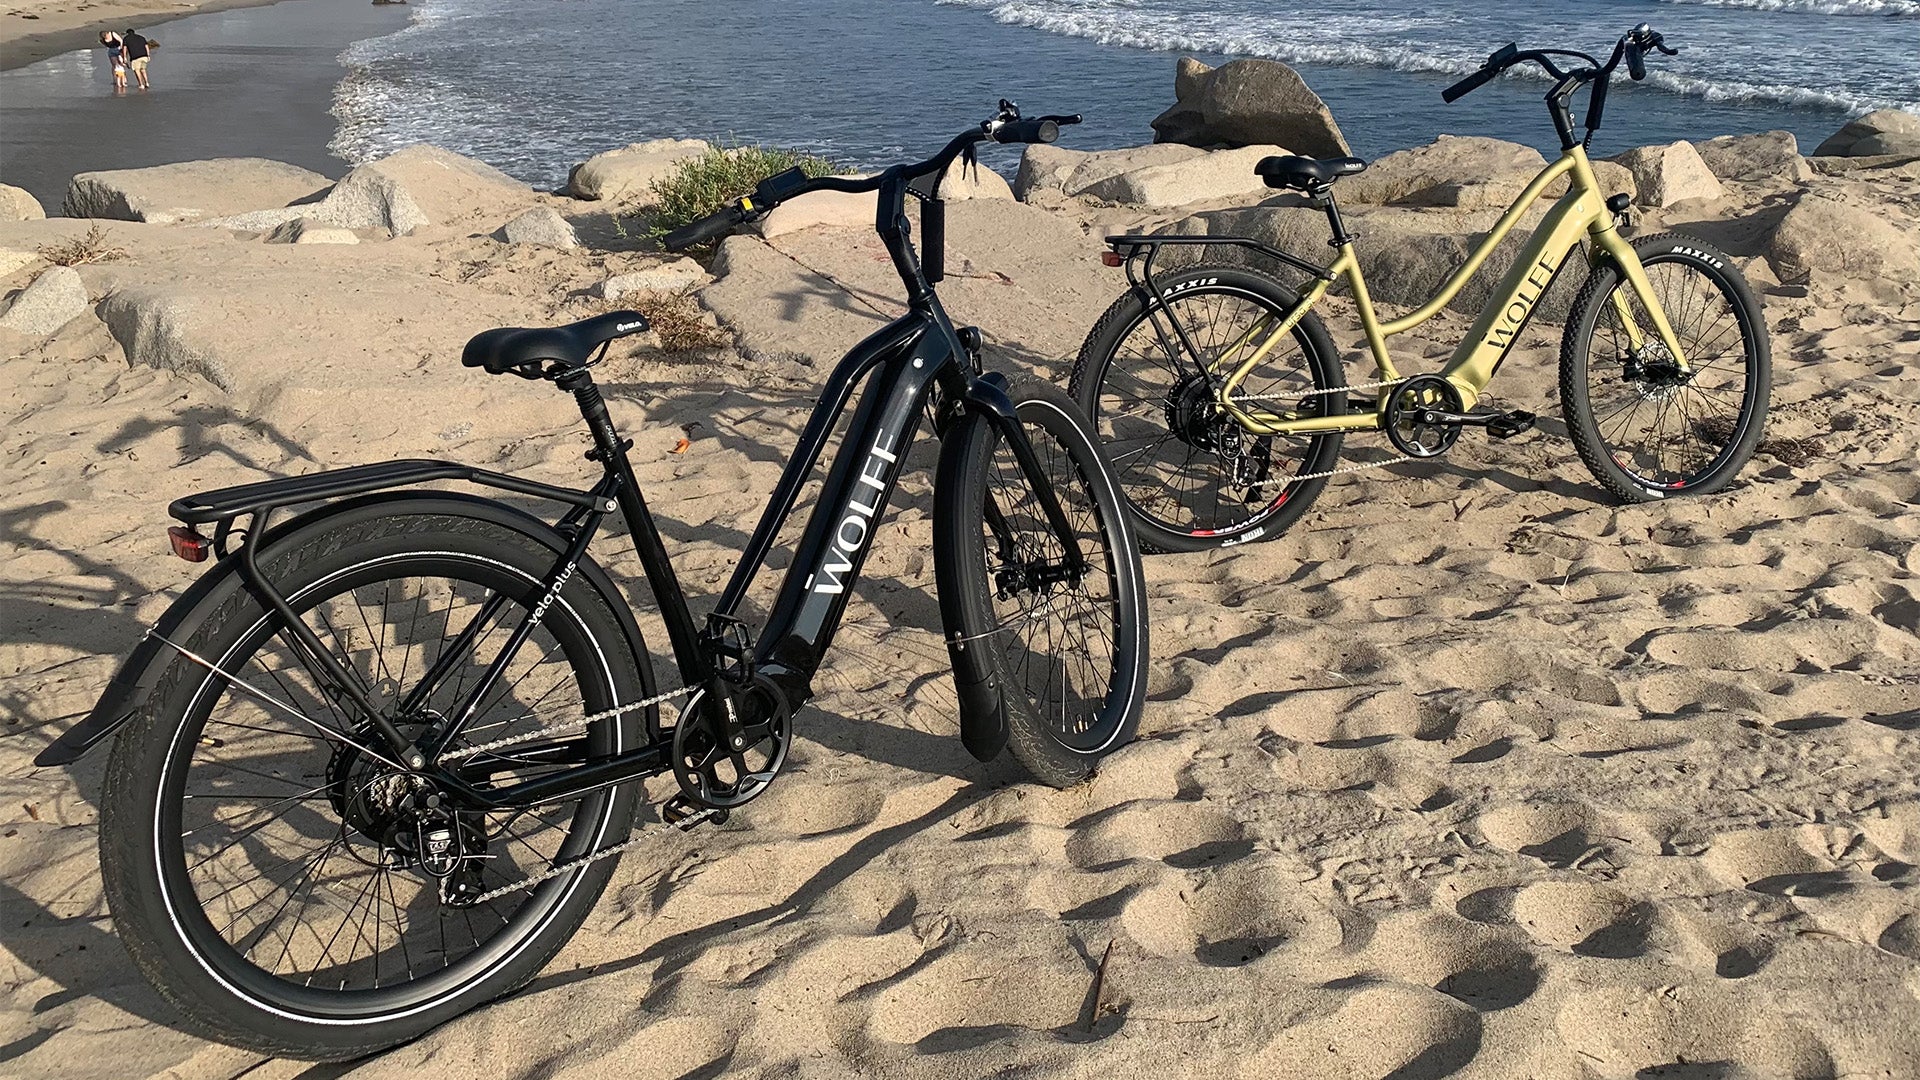 two Wolff e-bikes parked at the beach